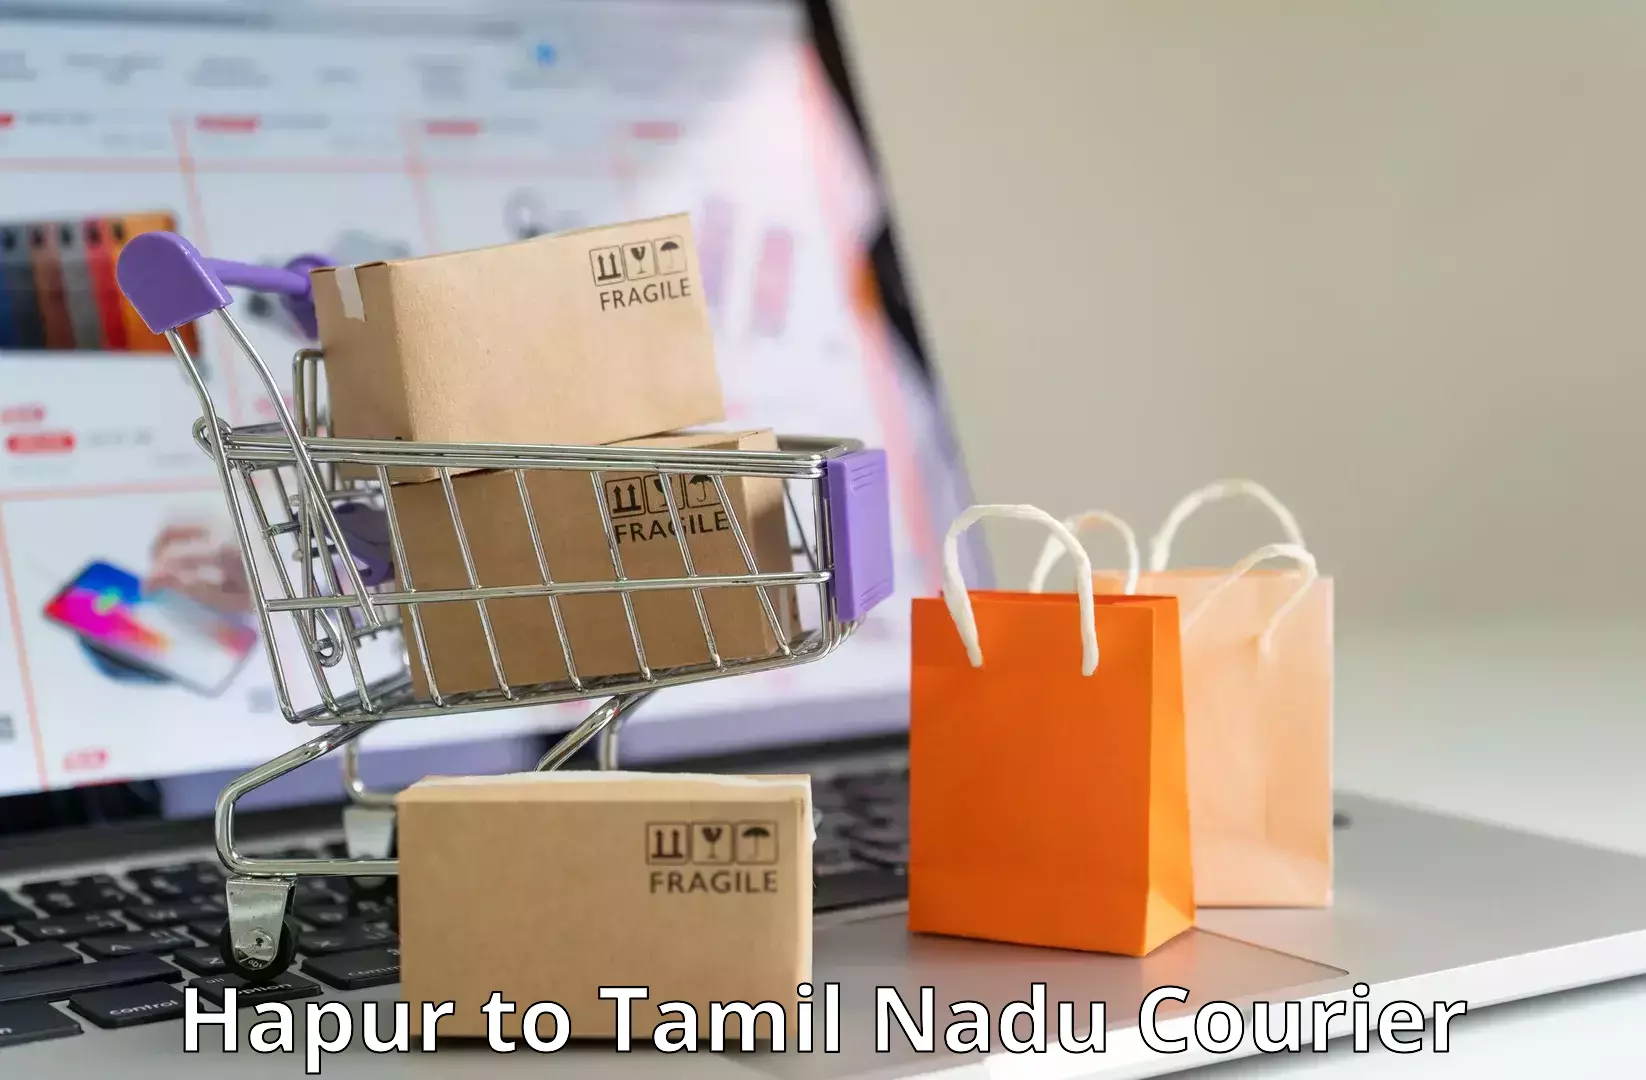 Next-generation courier services Hapur to Ooty